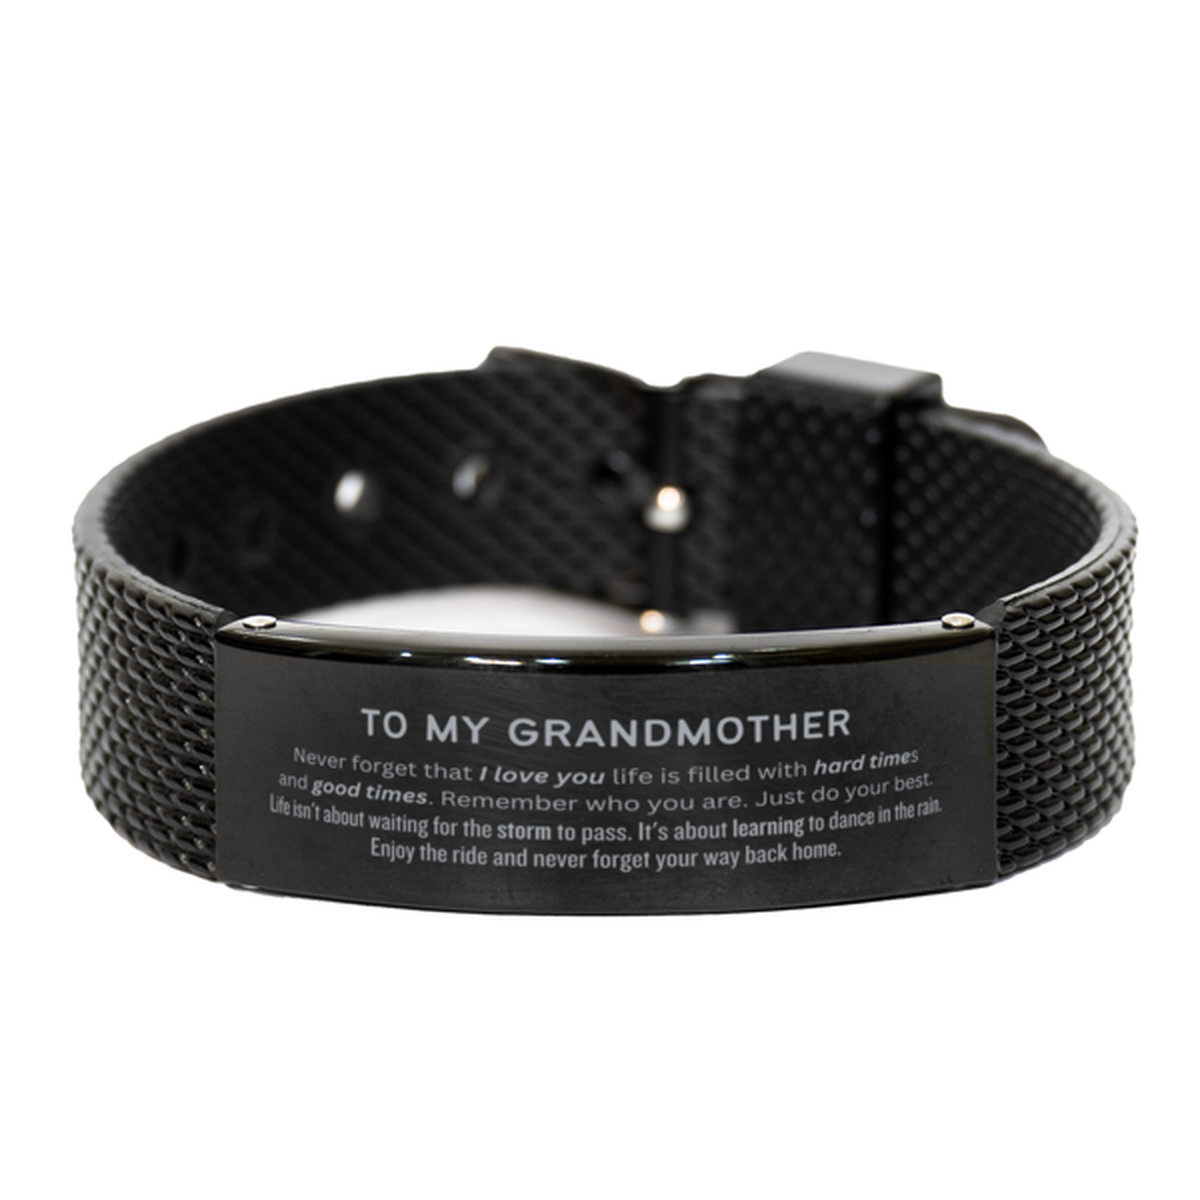 Christmas Grandmother Black Shark Mesh Bracelet Gifts, To My Grandmother Birthday Thank You Gifts For Grandmother, Graduation Unique Gifts For Grandmother To My Grandmother Never forget that I love you life is filled with hard times and good times. Rememb